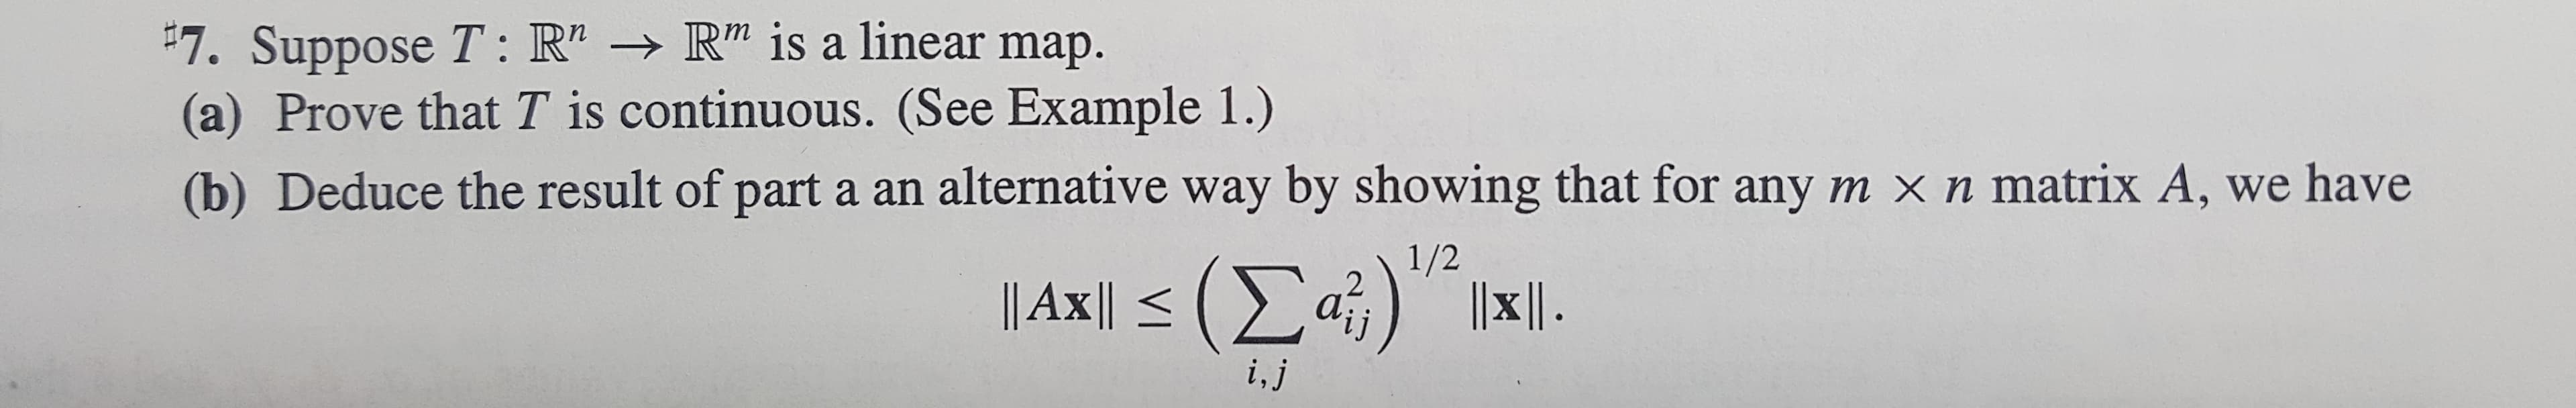 "7. Suppose T: R" -R" is a linear map.
(a) Prove that T is continuous. (See Example 1.)
(b) Deduce the result of part a an alternative way by showing that for any m x n matrix A, we have
1/2
2
| Axl<(Σ a
i,j
